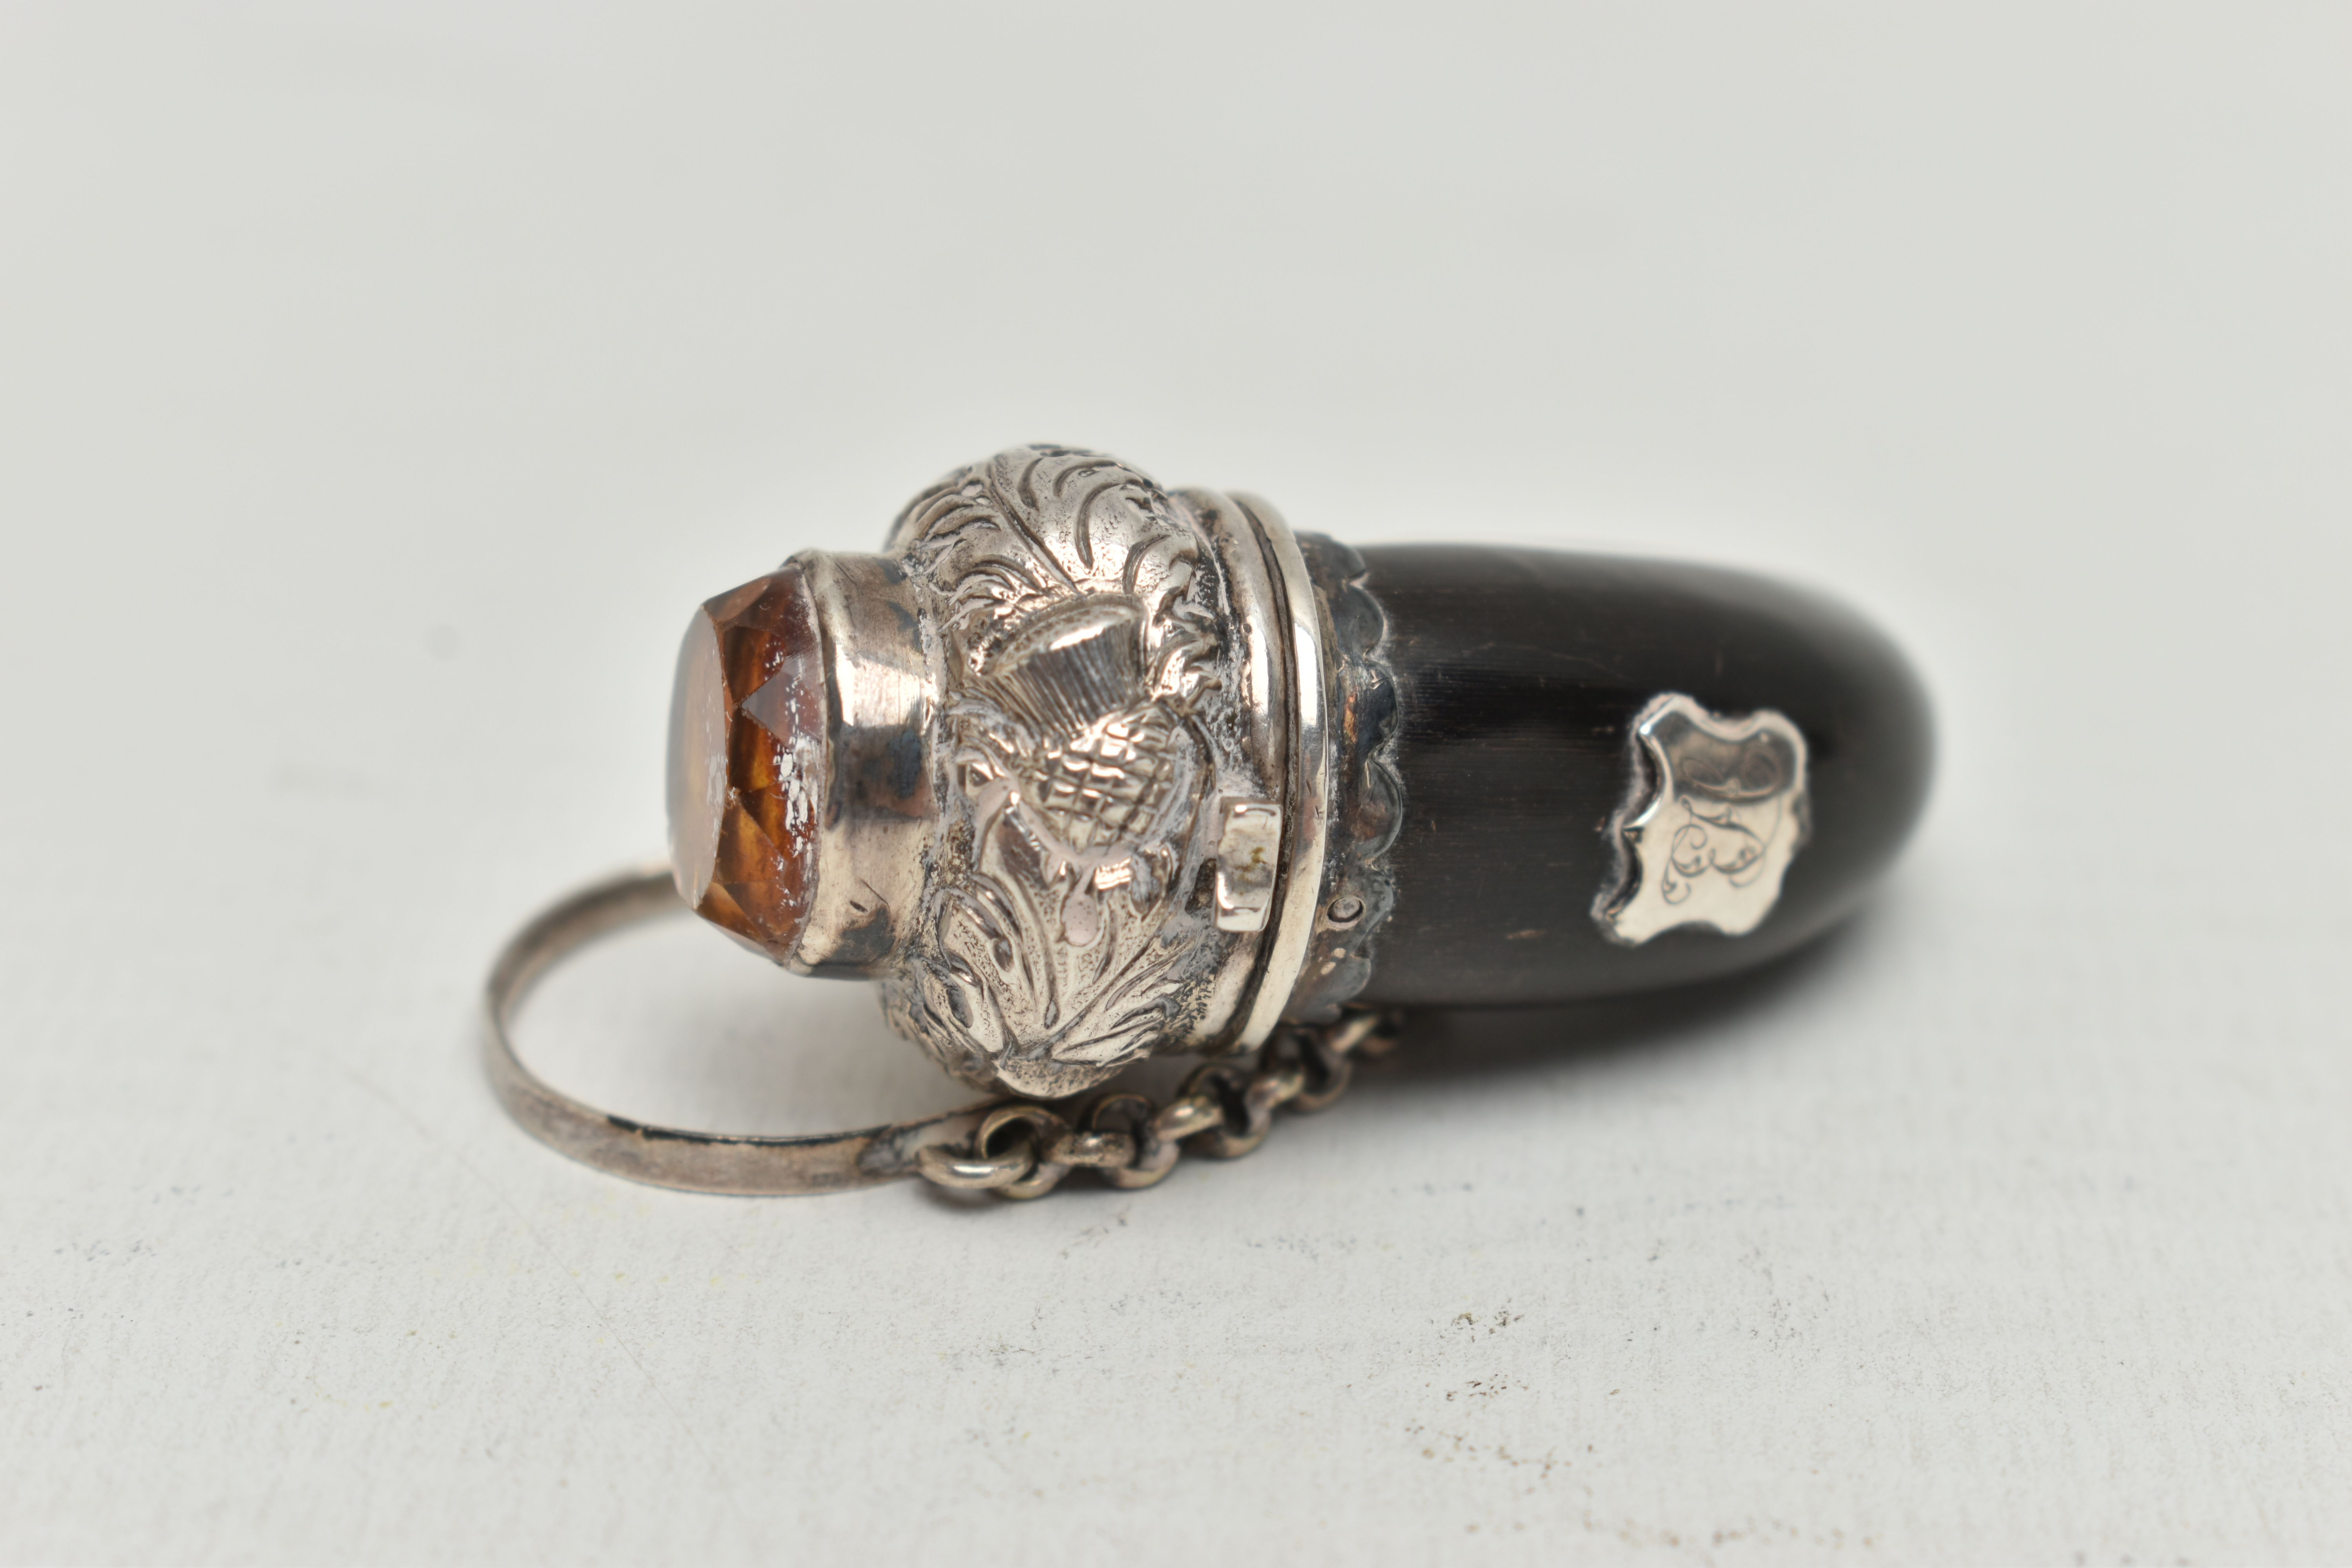 A VICTORIAN SILVER MOUNTED HORN VINAIGRETTE, the hinged cover set with a paste and repoussé